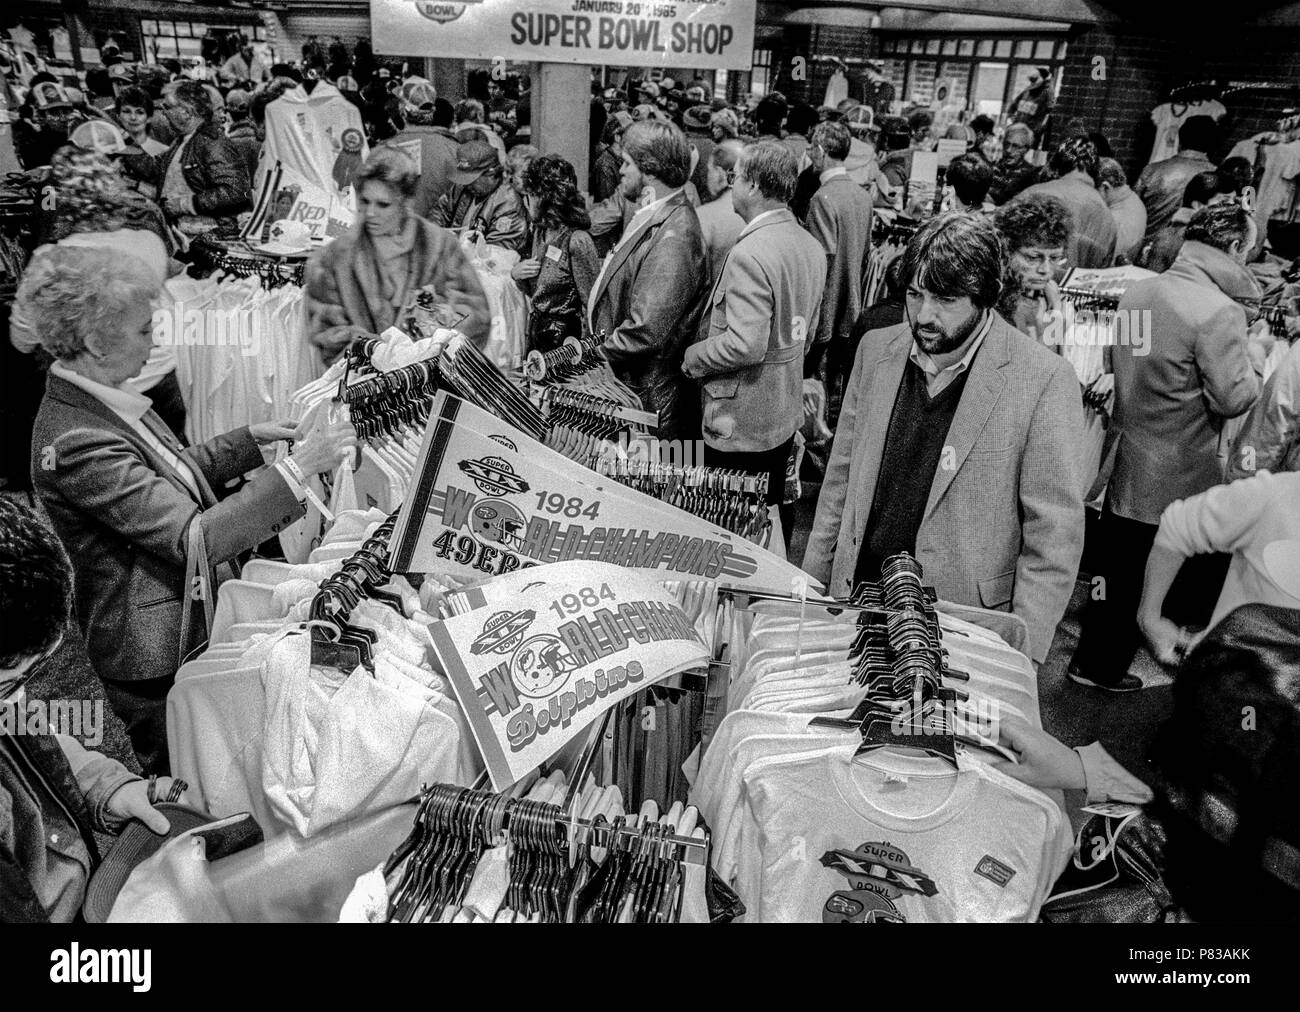 Stanford, California, USA. 20th Jan, 1985. Pennants anticipate both victories at souvenir store near the Super Bowl XIX tailgate on the Stanford University campus. The San Francisco 49ers defeated the Miami Dolphins 38-16 on Sunday, January 20, 1985. Credit: Al Golub/ZUMA Wire/Alamy Live News Stock Photo